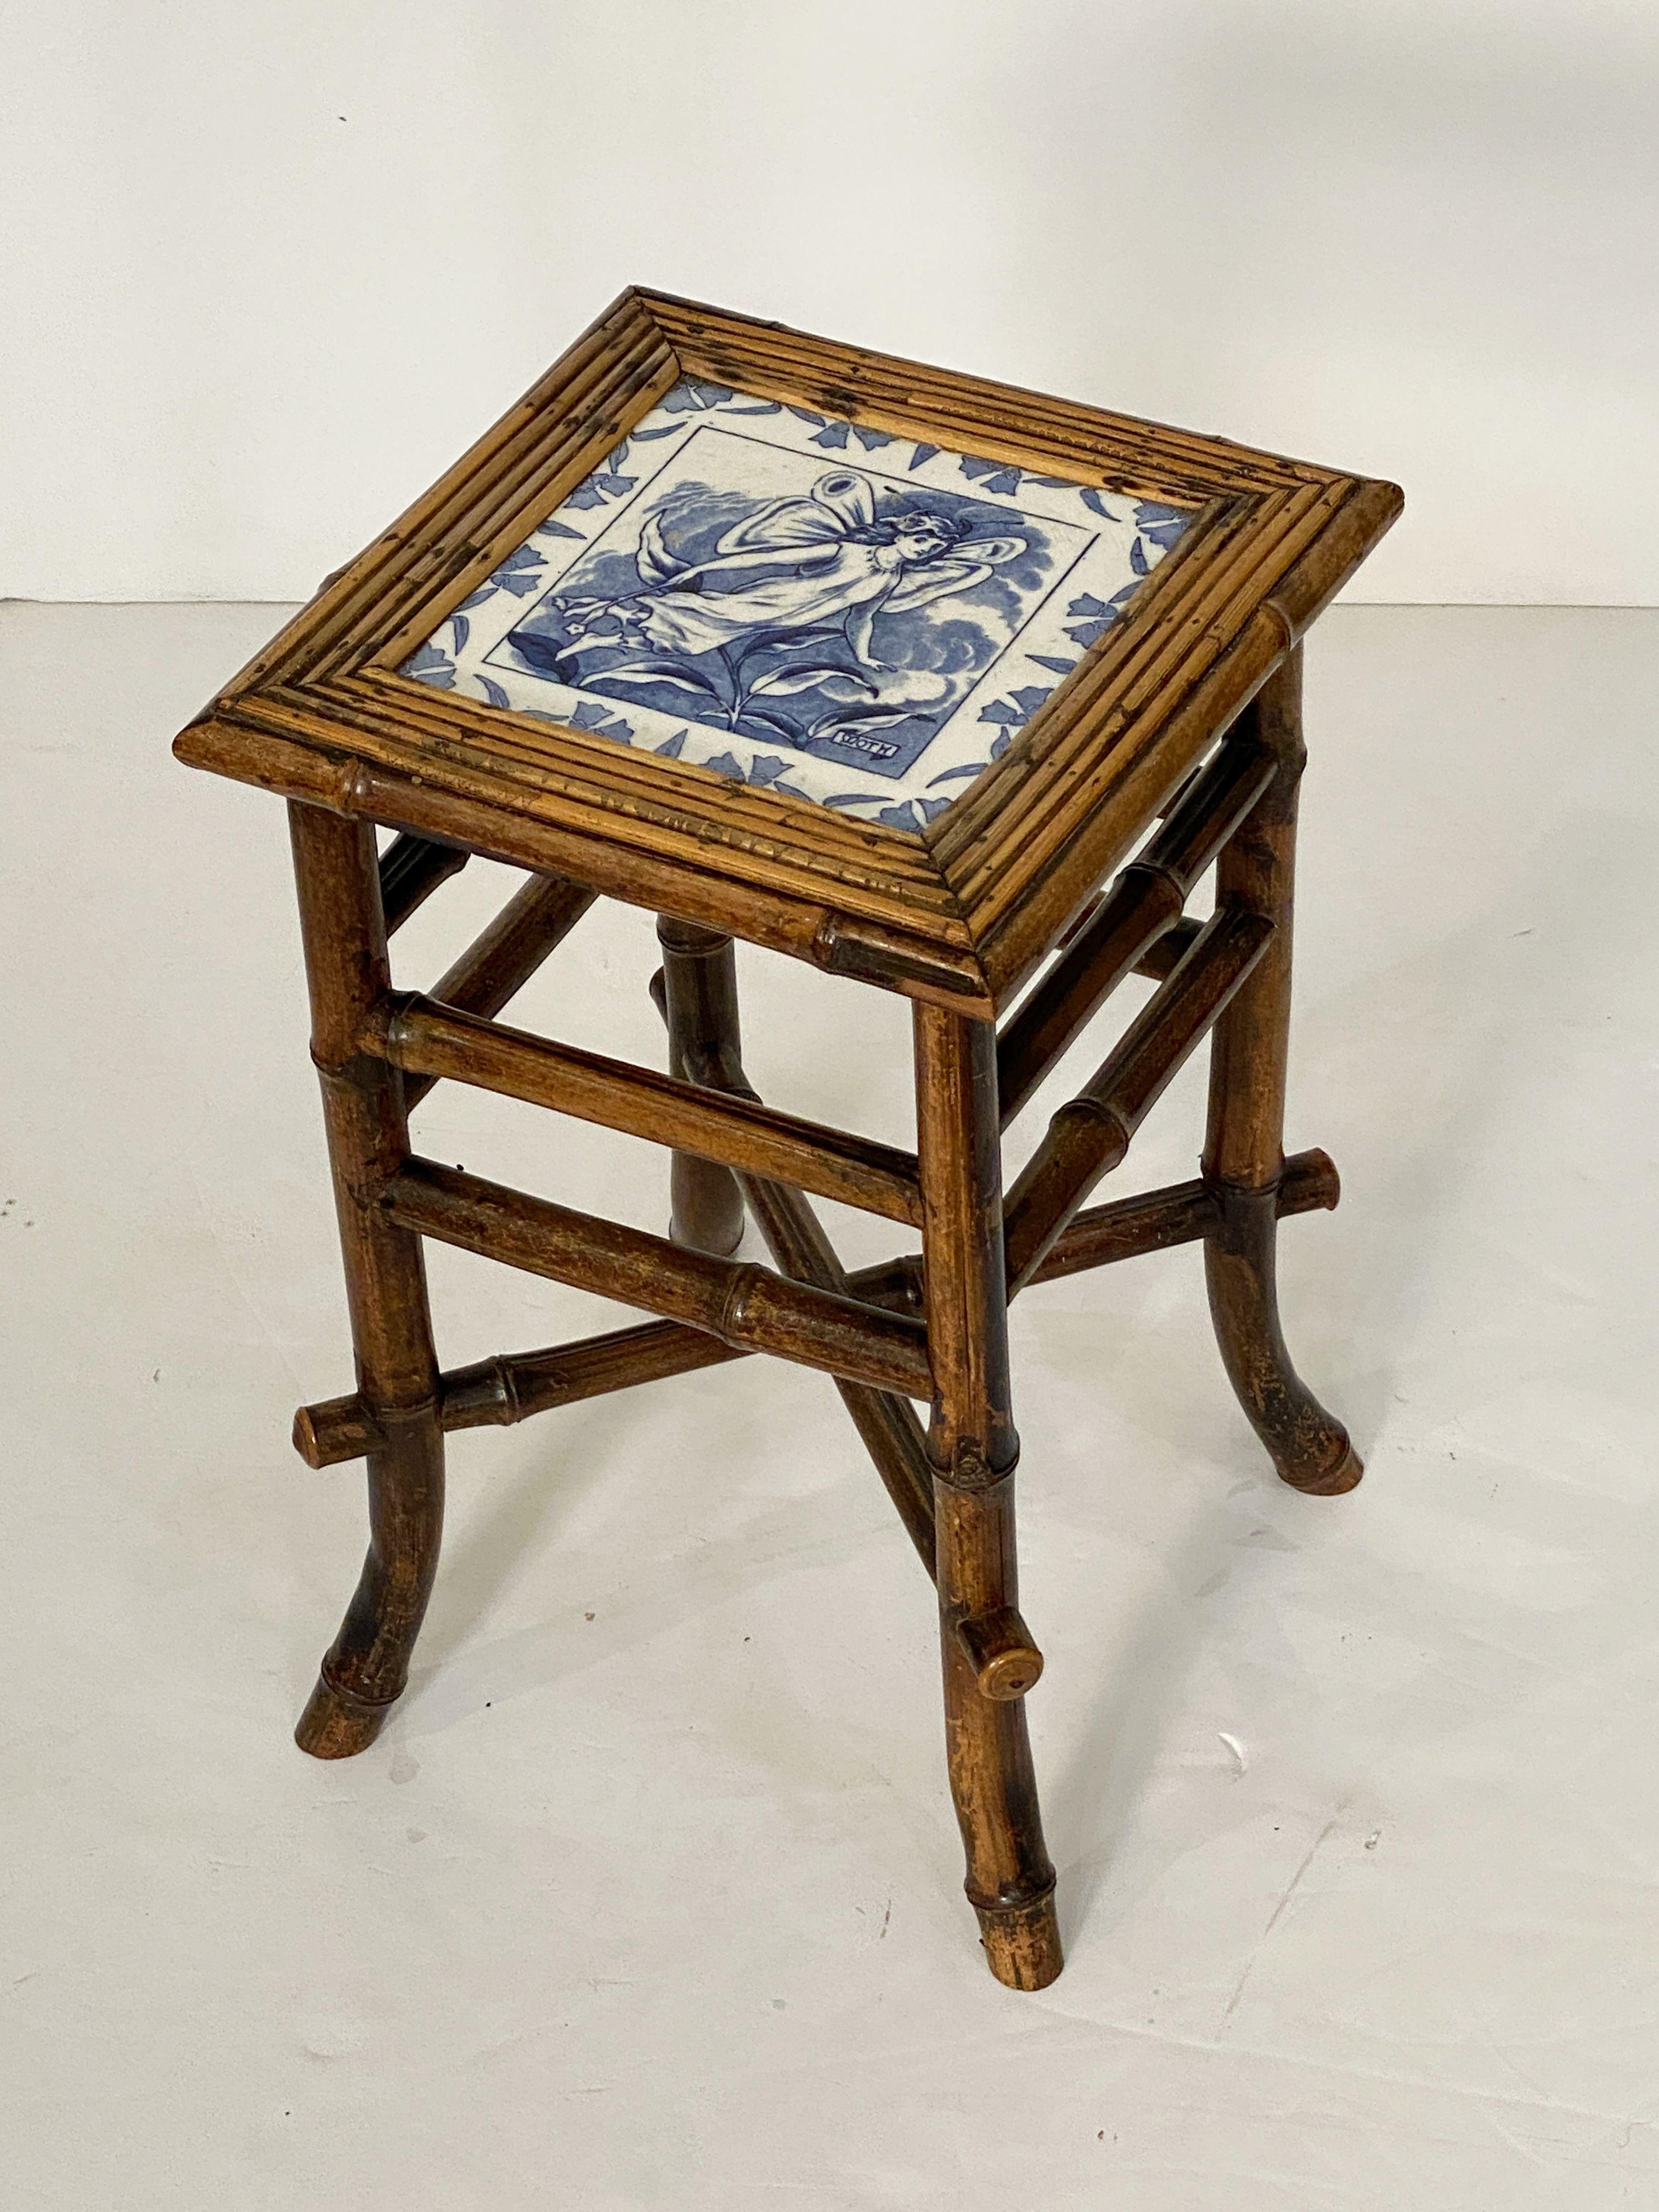 English Bamboo Table or Stool with Tile Seat from the Aesthetic Movement Era For Sale 5